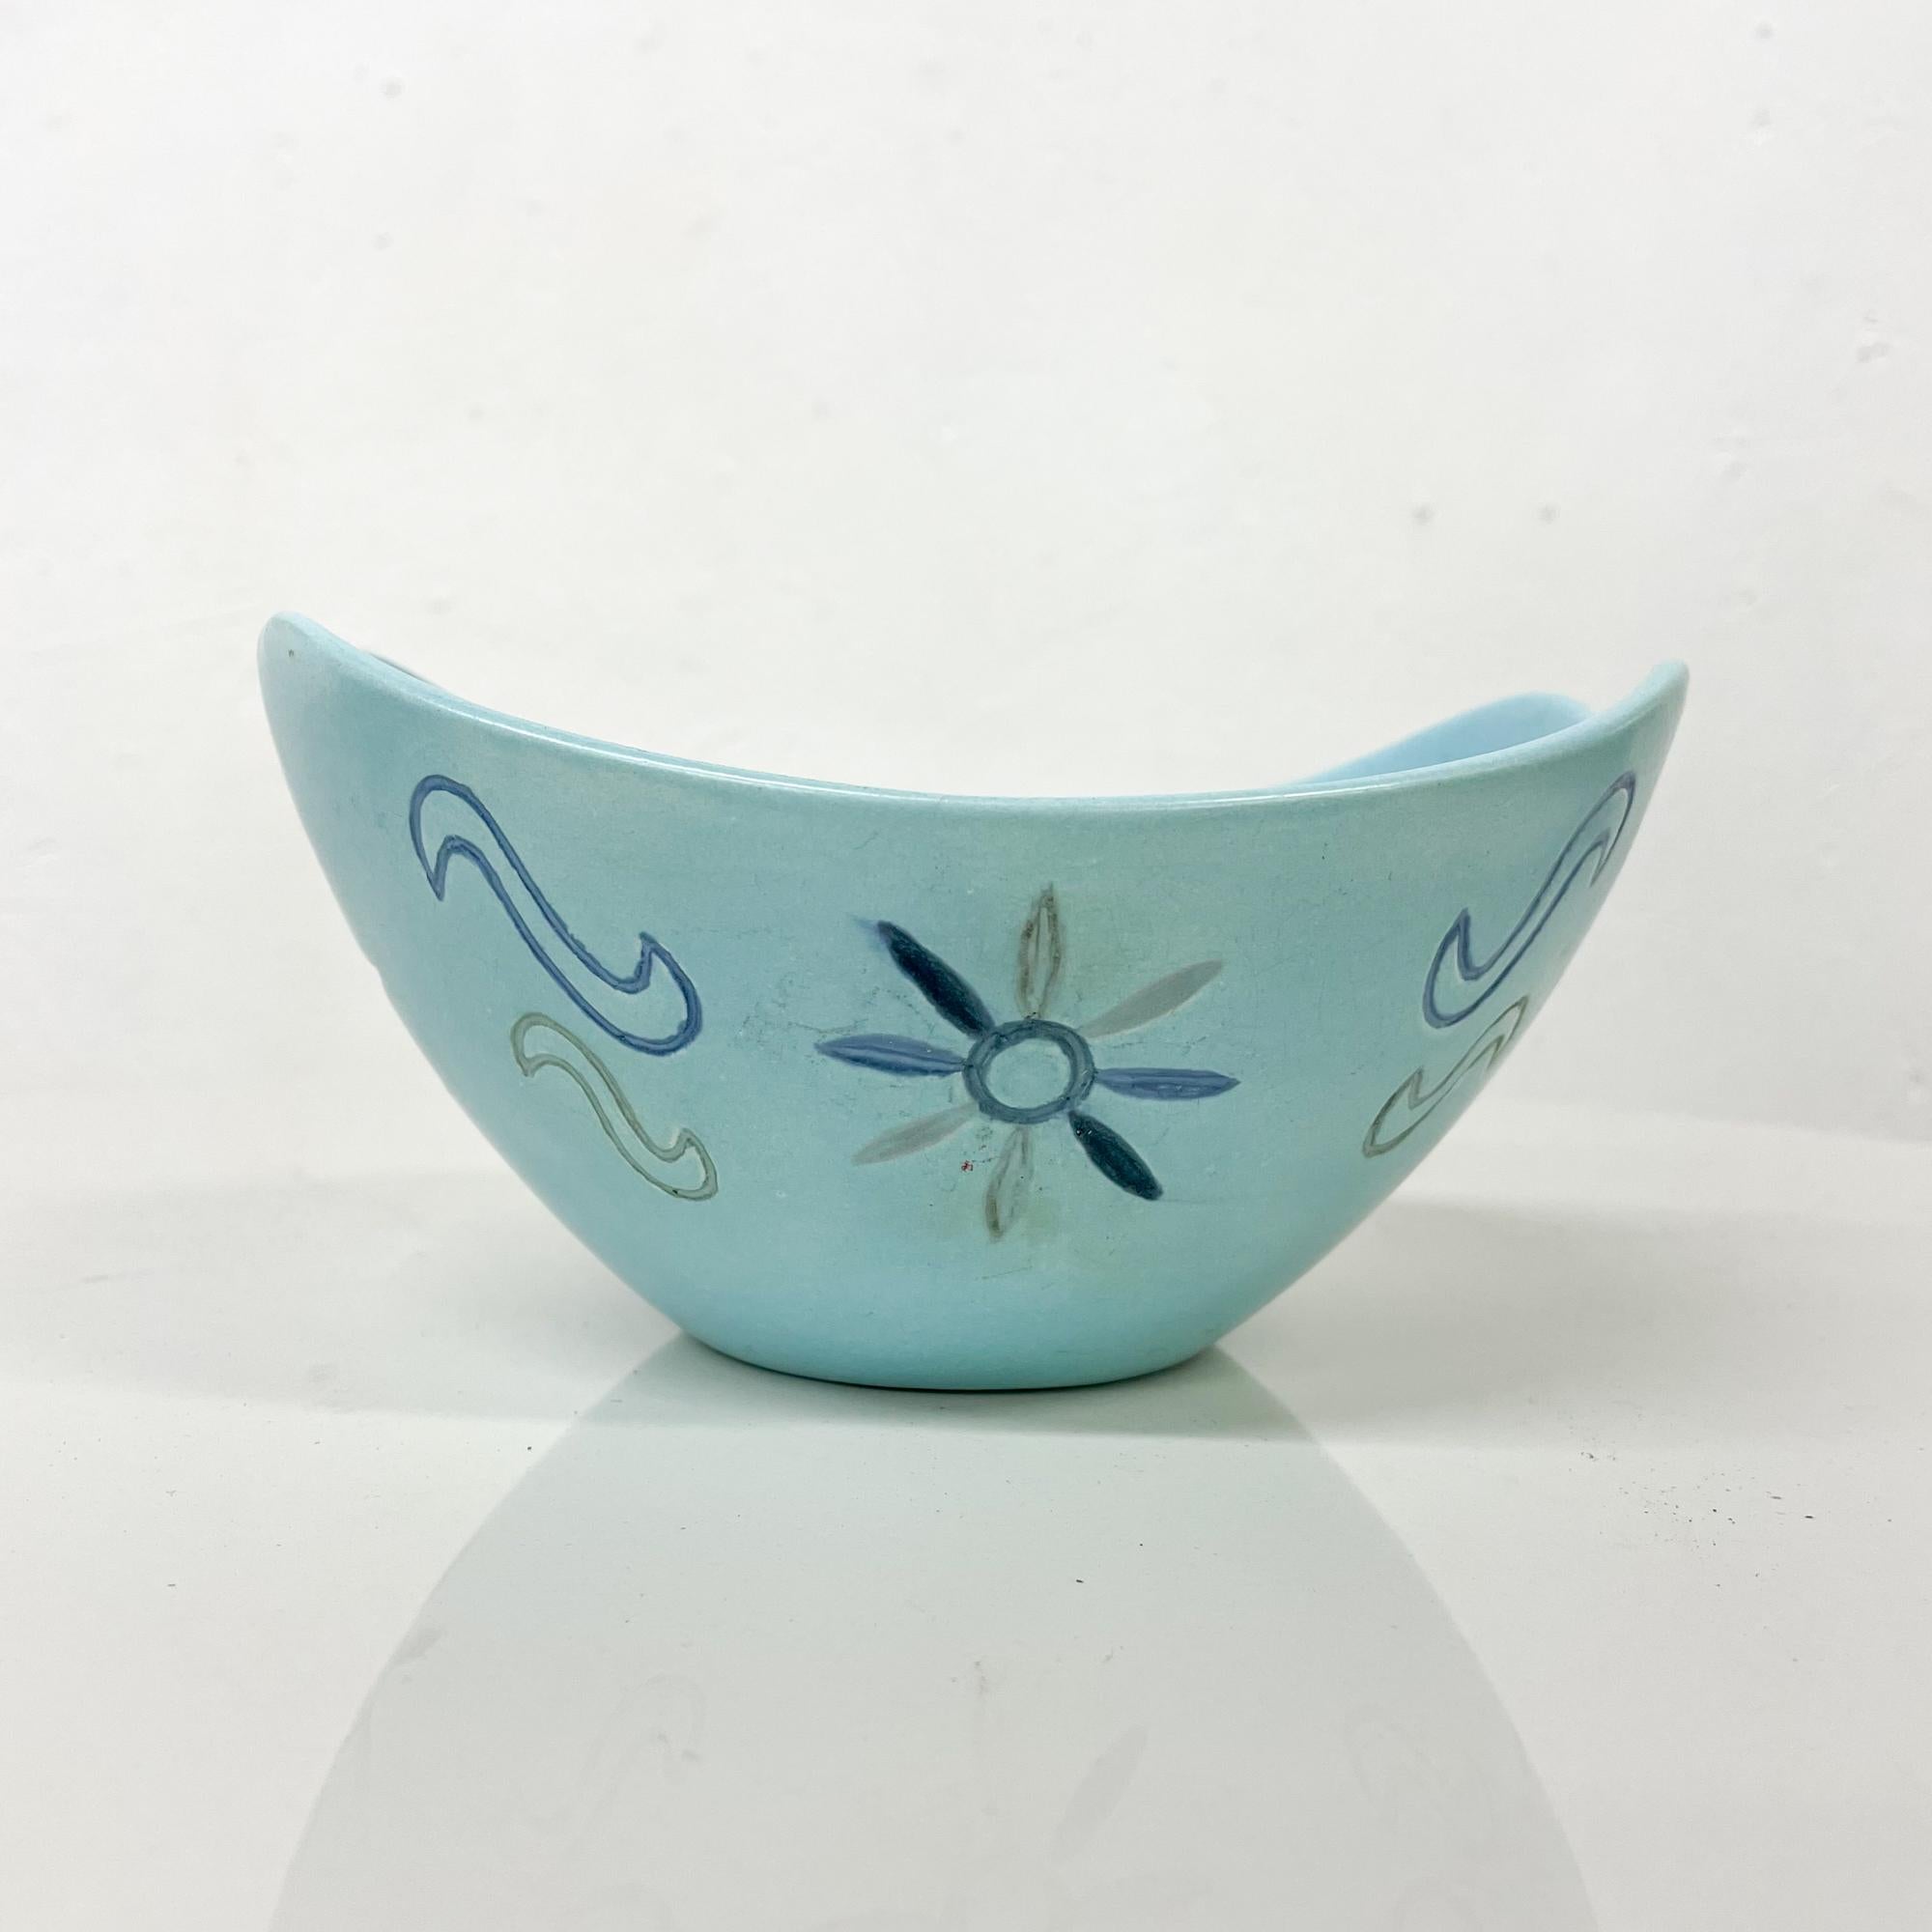 Mid-Century Modern 1965 Hand Painted Baby Blue Bowl Art Pottery Signed Bea Grant